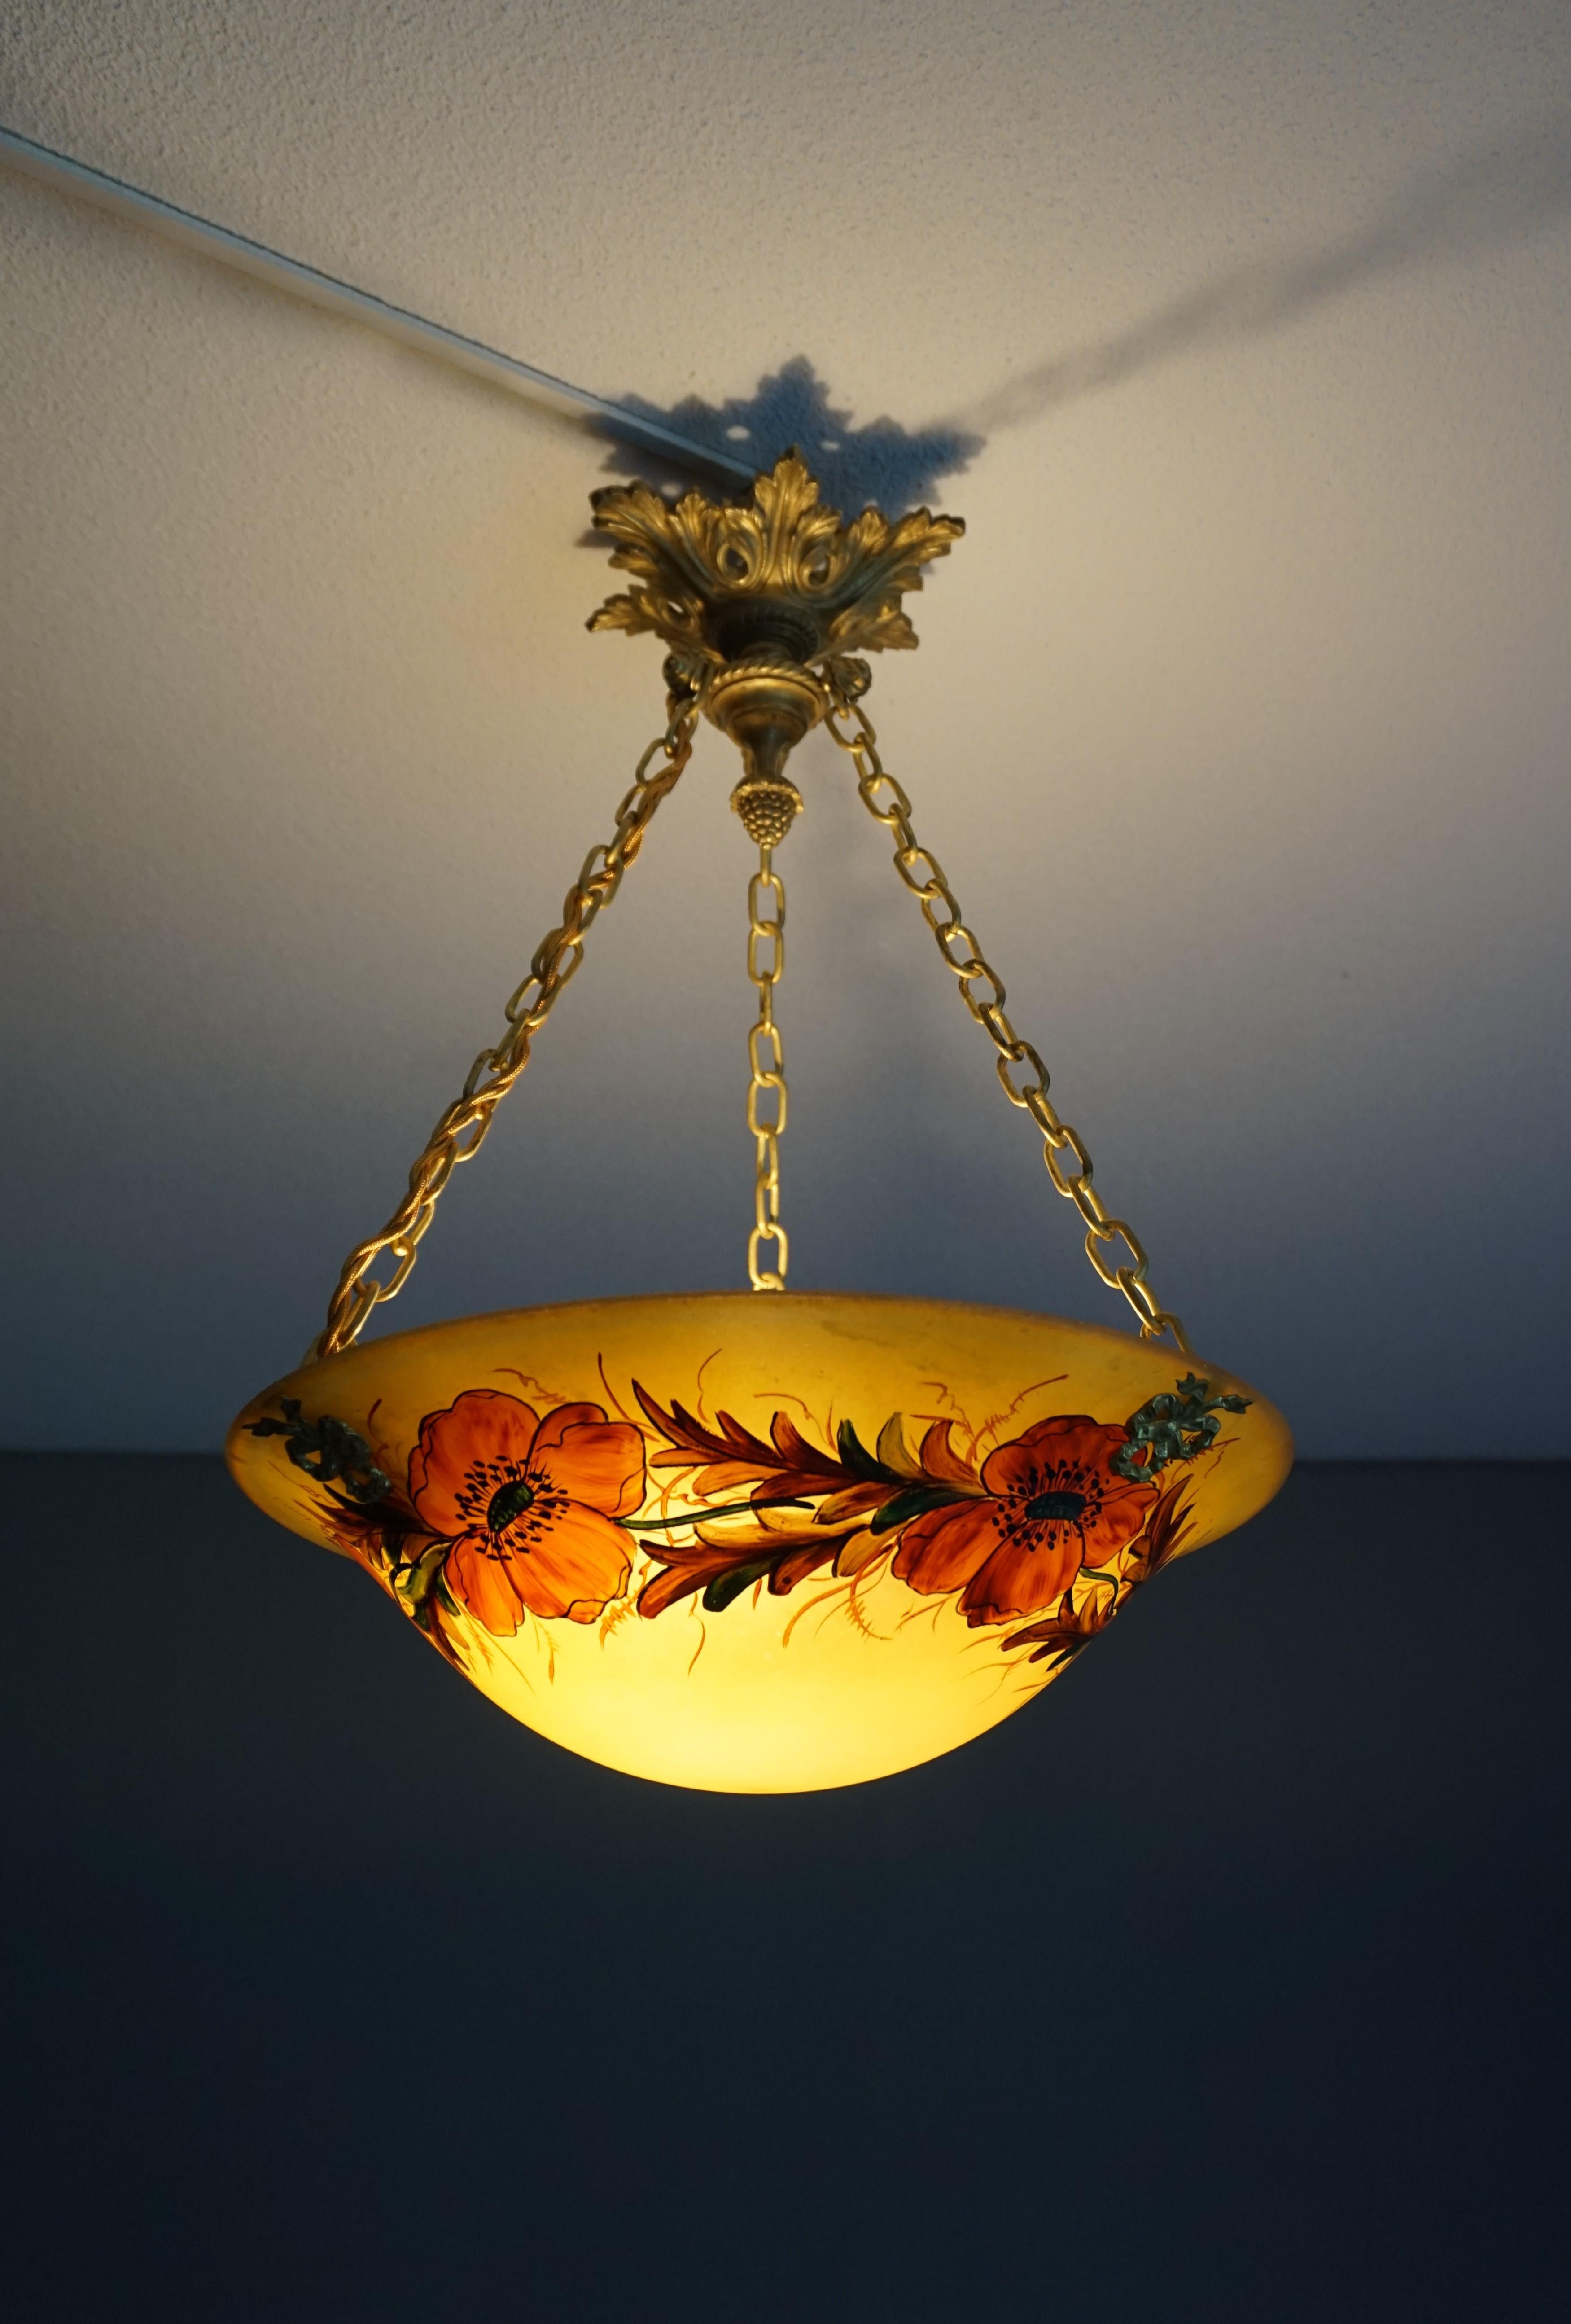 Marvellously hand painted poppy flowers pendant by Leune.

With early 20th century lighting being one of our specialities, we always get excited when we find a light fixture that we have never seen before. We loved this fixture when we first saw it